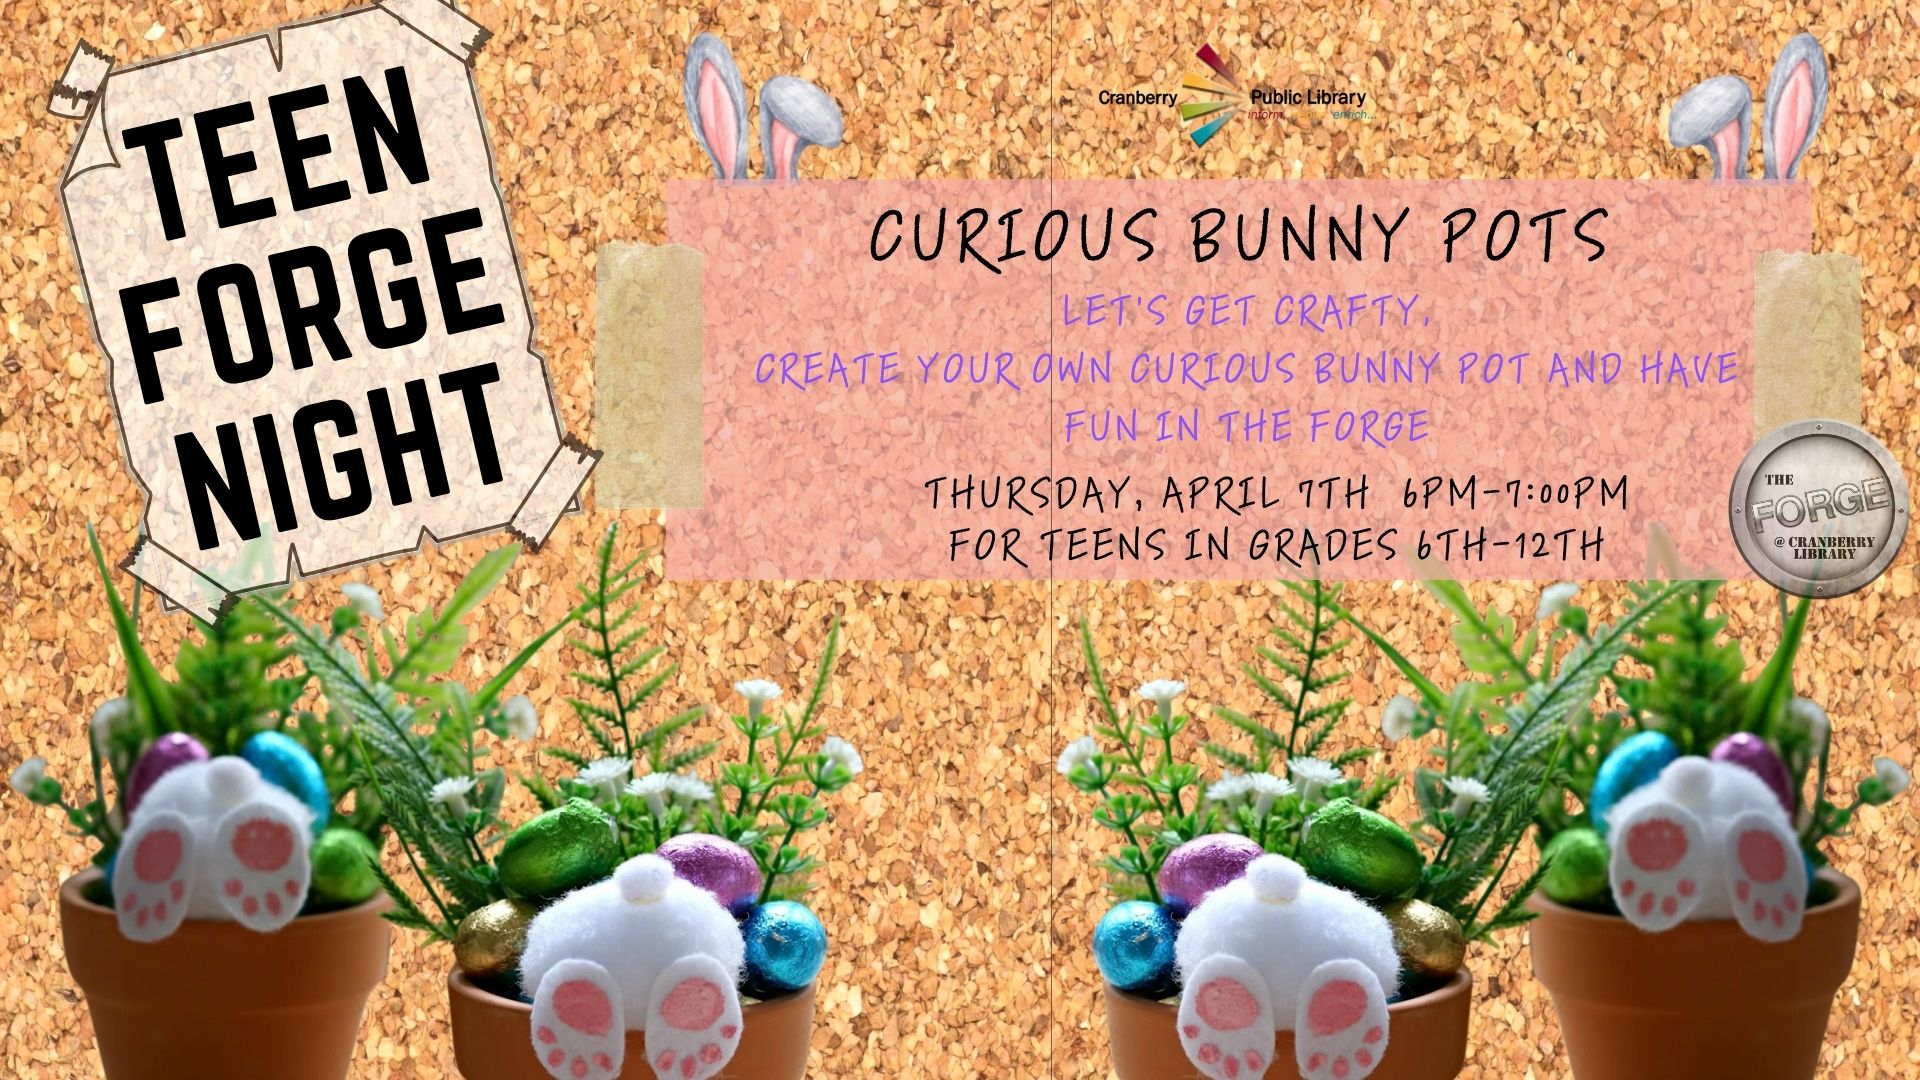 Flyer for Teen Forge Night Curious Bunny Pots